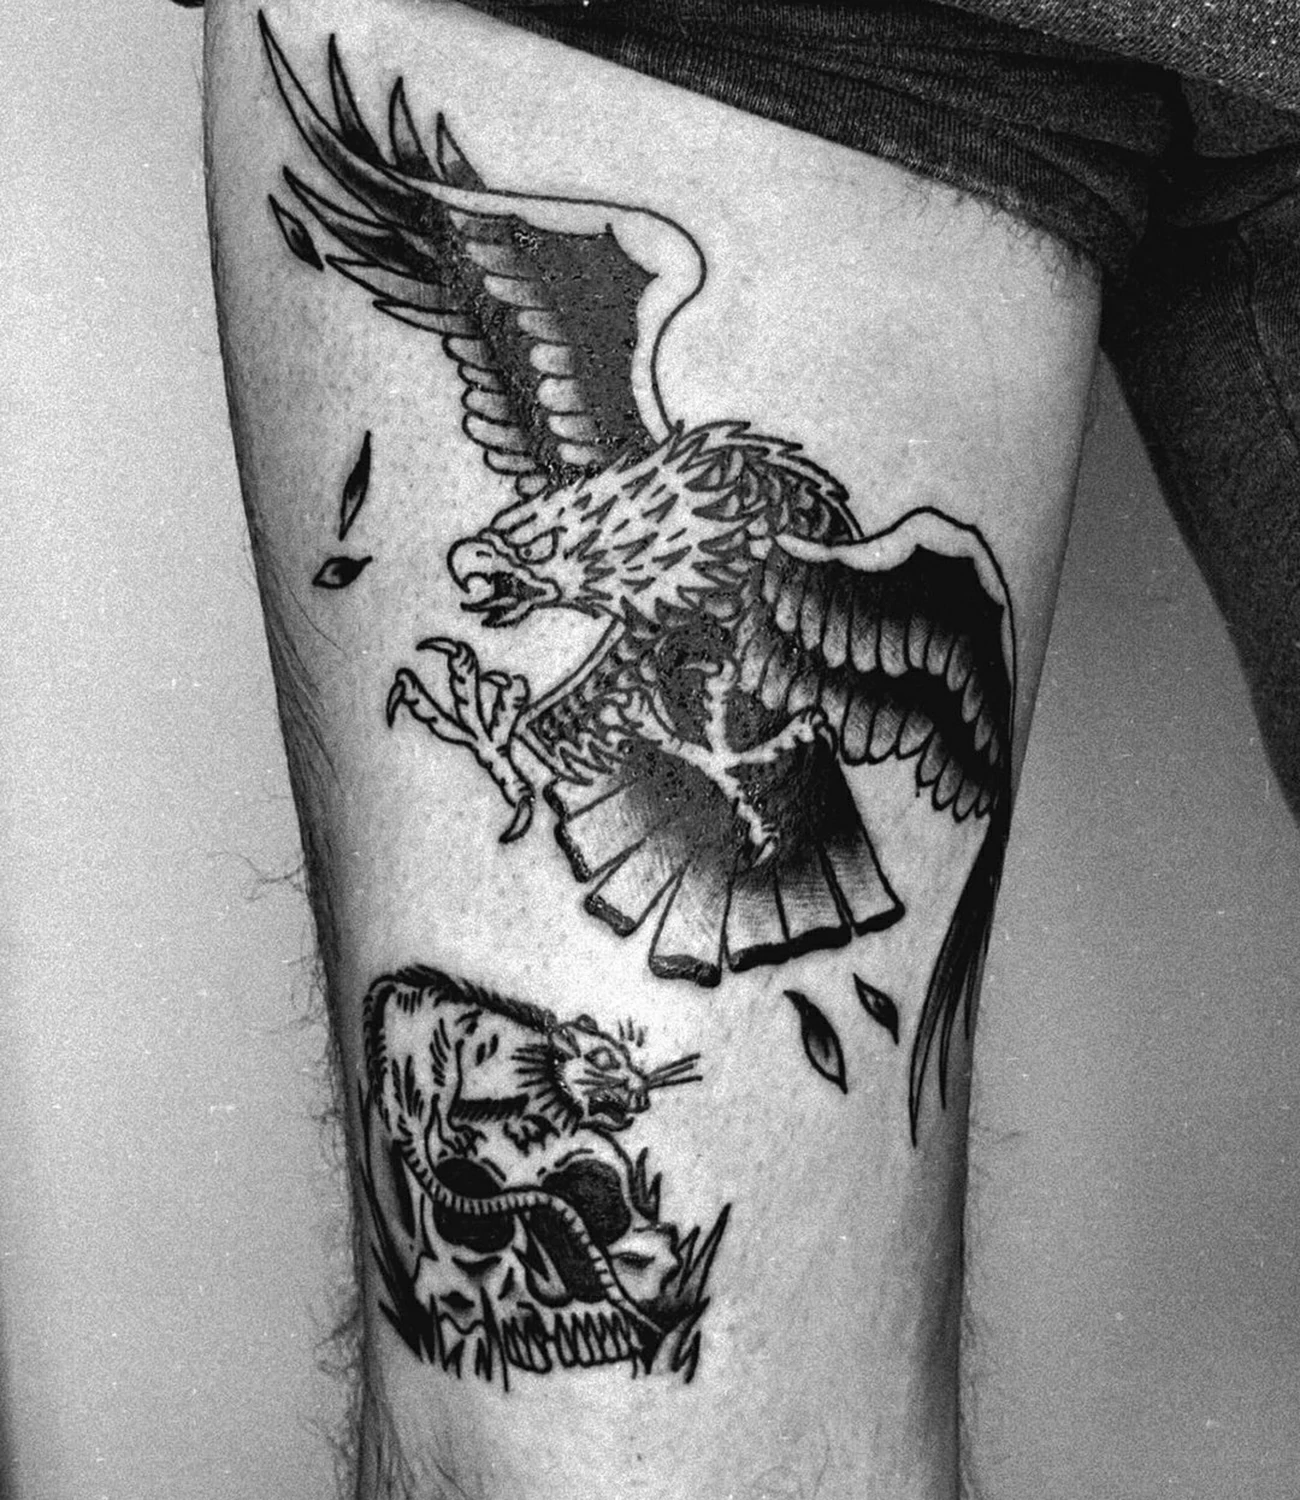 Sailor Jerry Tattoos Black and White